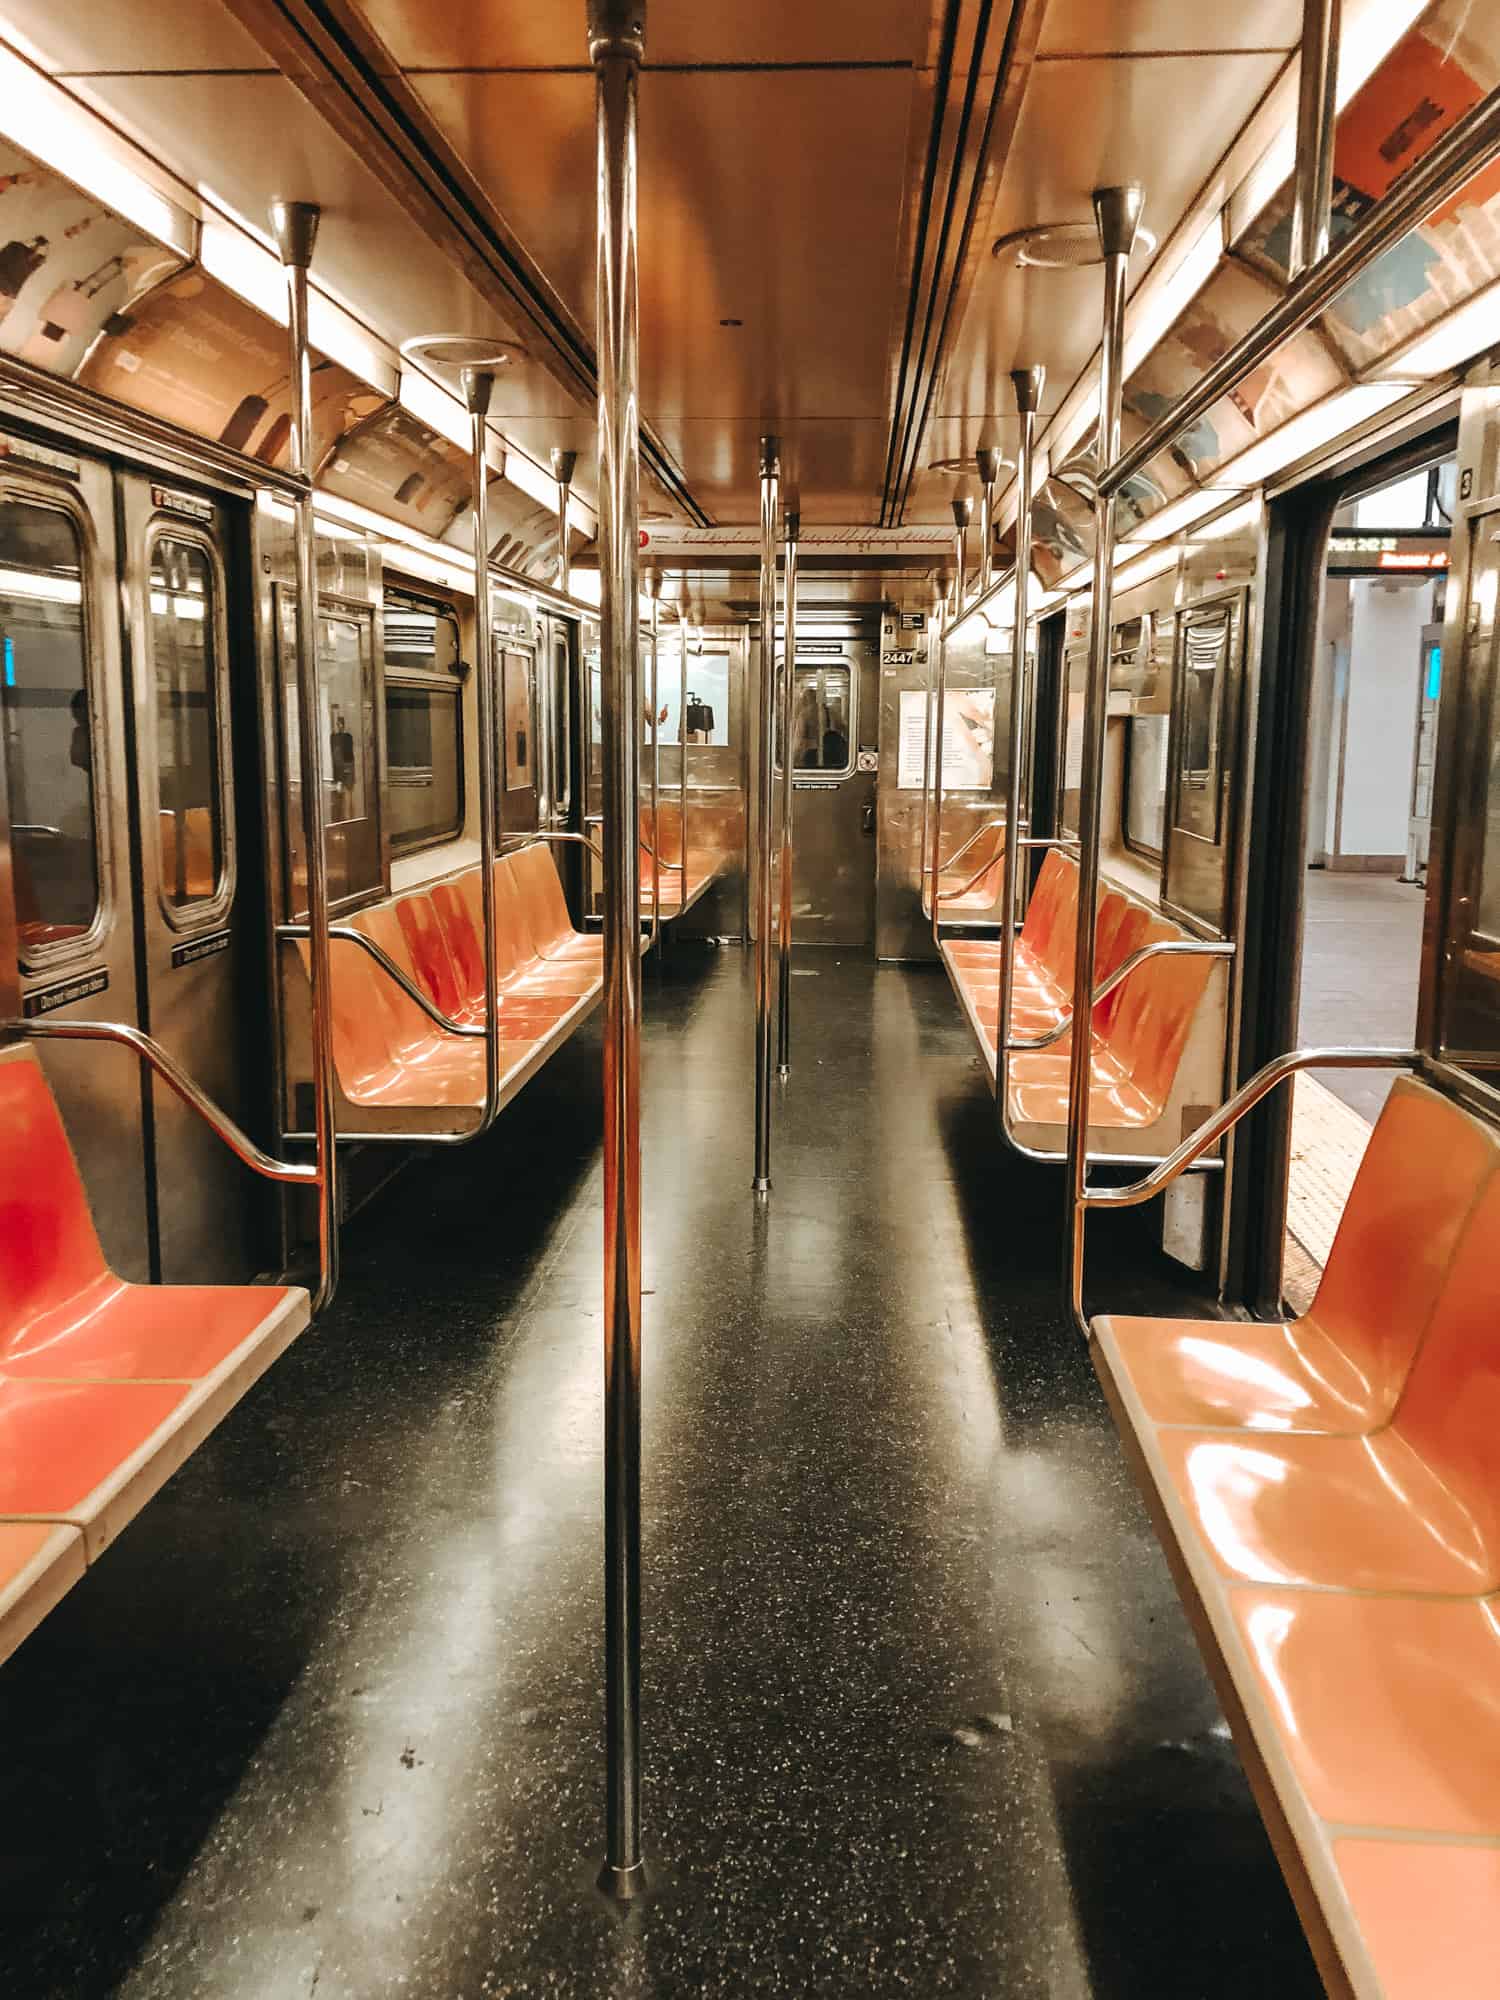 The New York Subway is the best way to get around New York in 4 days